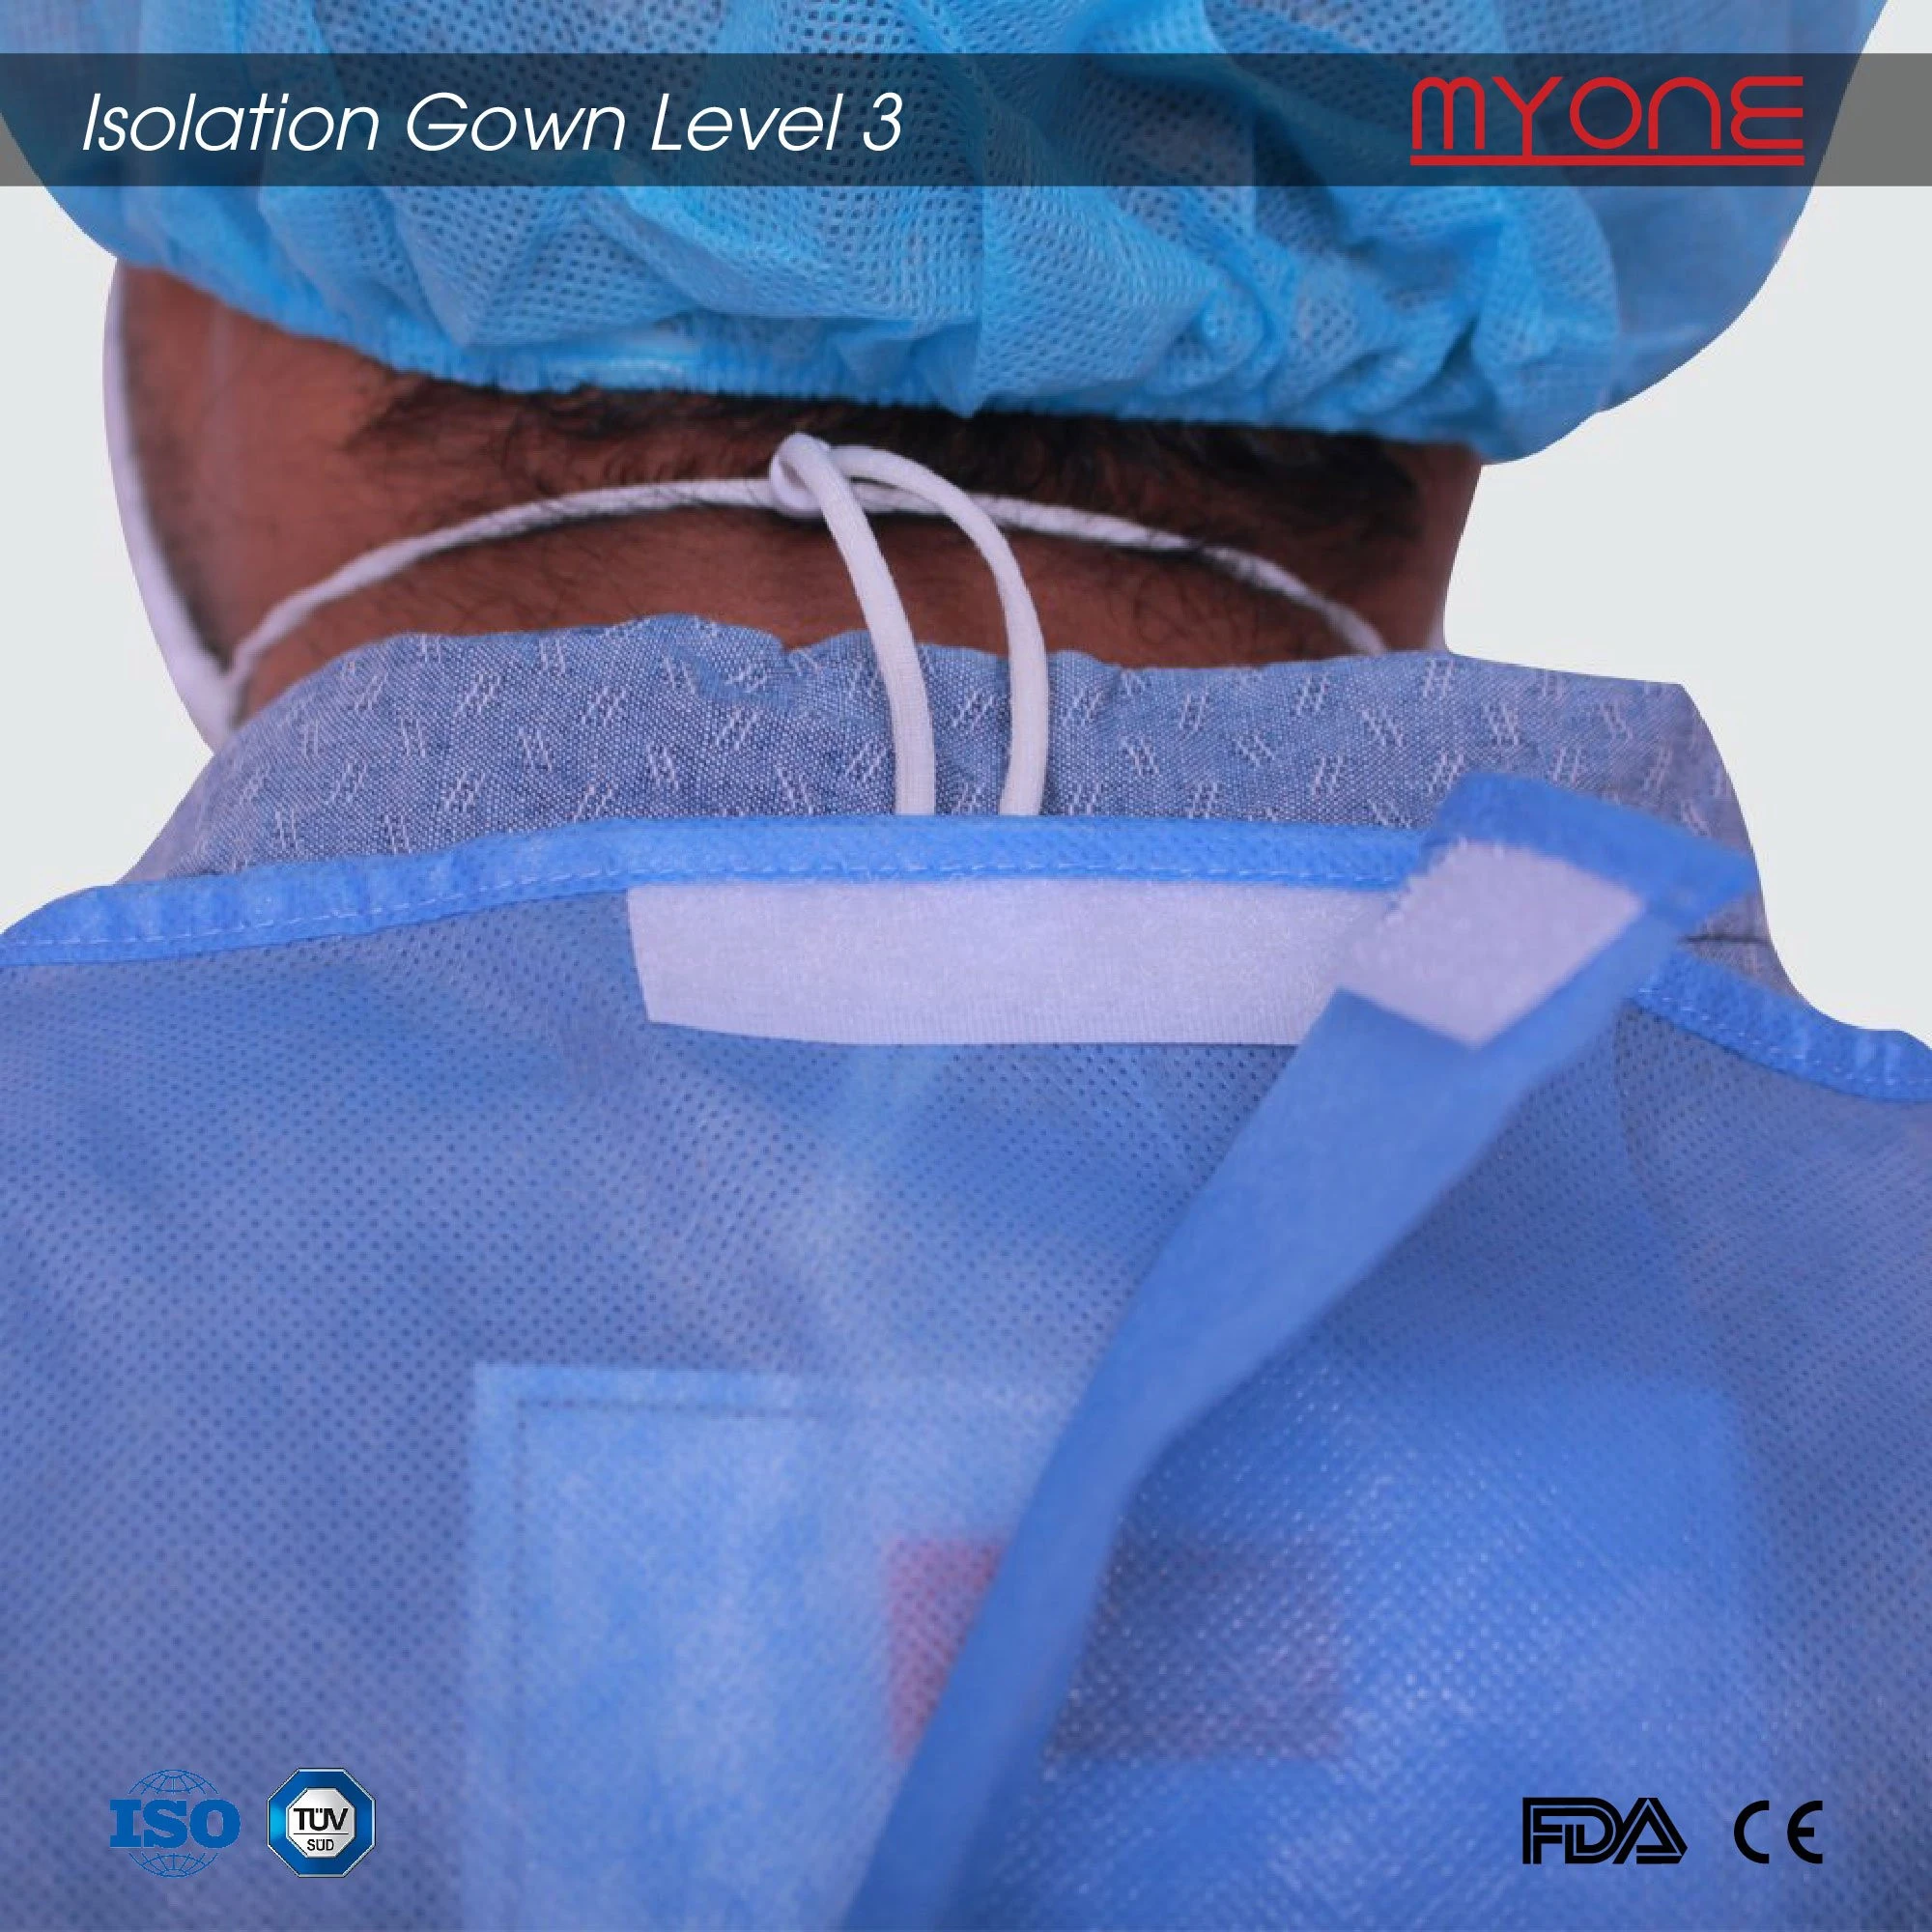 Wholesale Protective Equipment Level 3 Non Surgical Isolation Gown With Water Proof Function From Vietnam